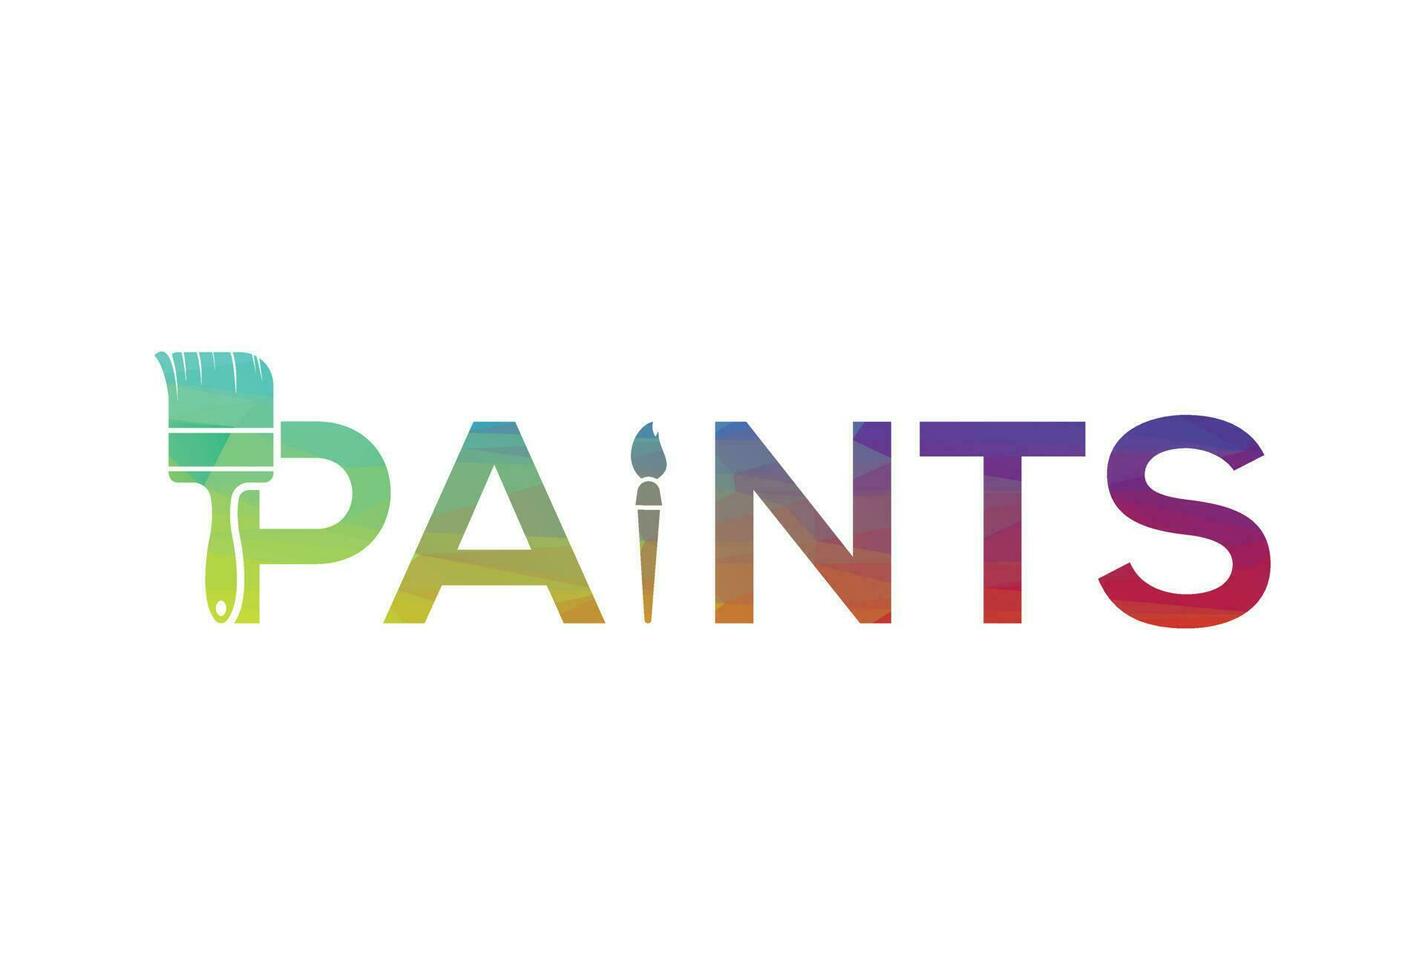 Low Poly and Creative Paint  Brush logo design, Vector design concept